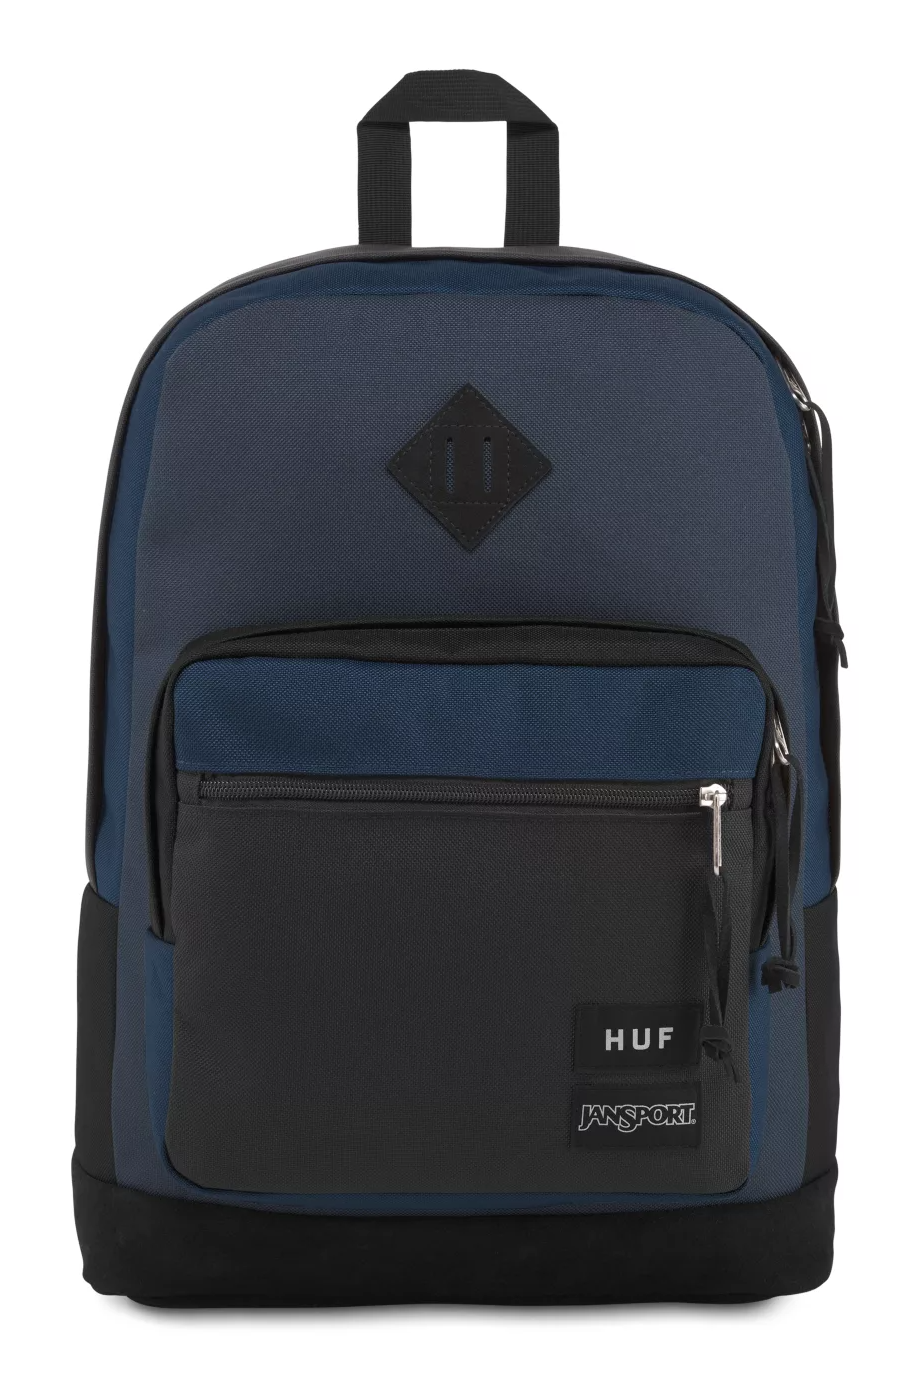 Huf x Jansport Right Pack